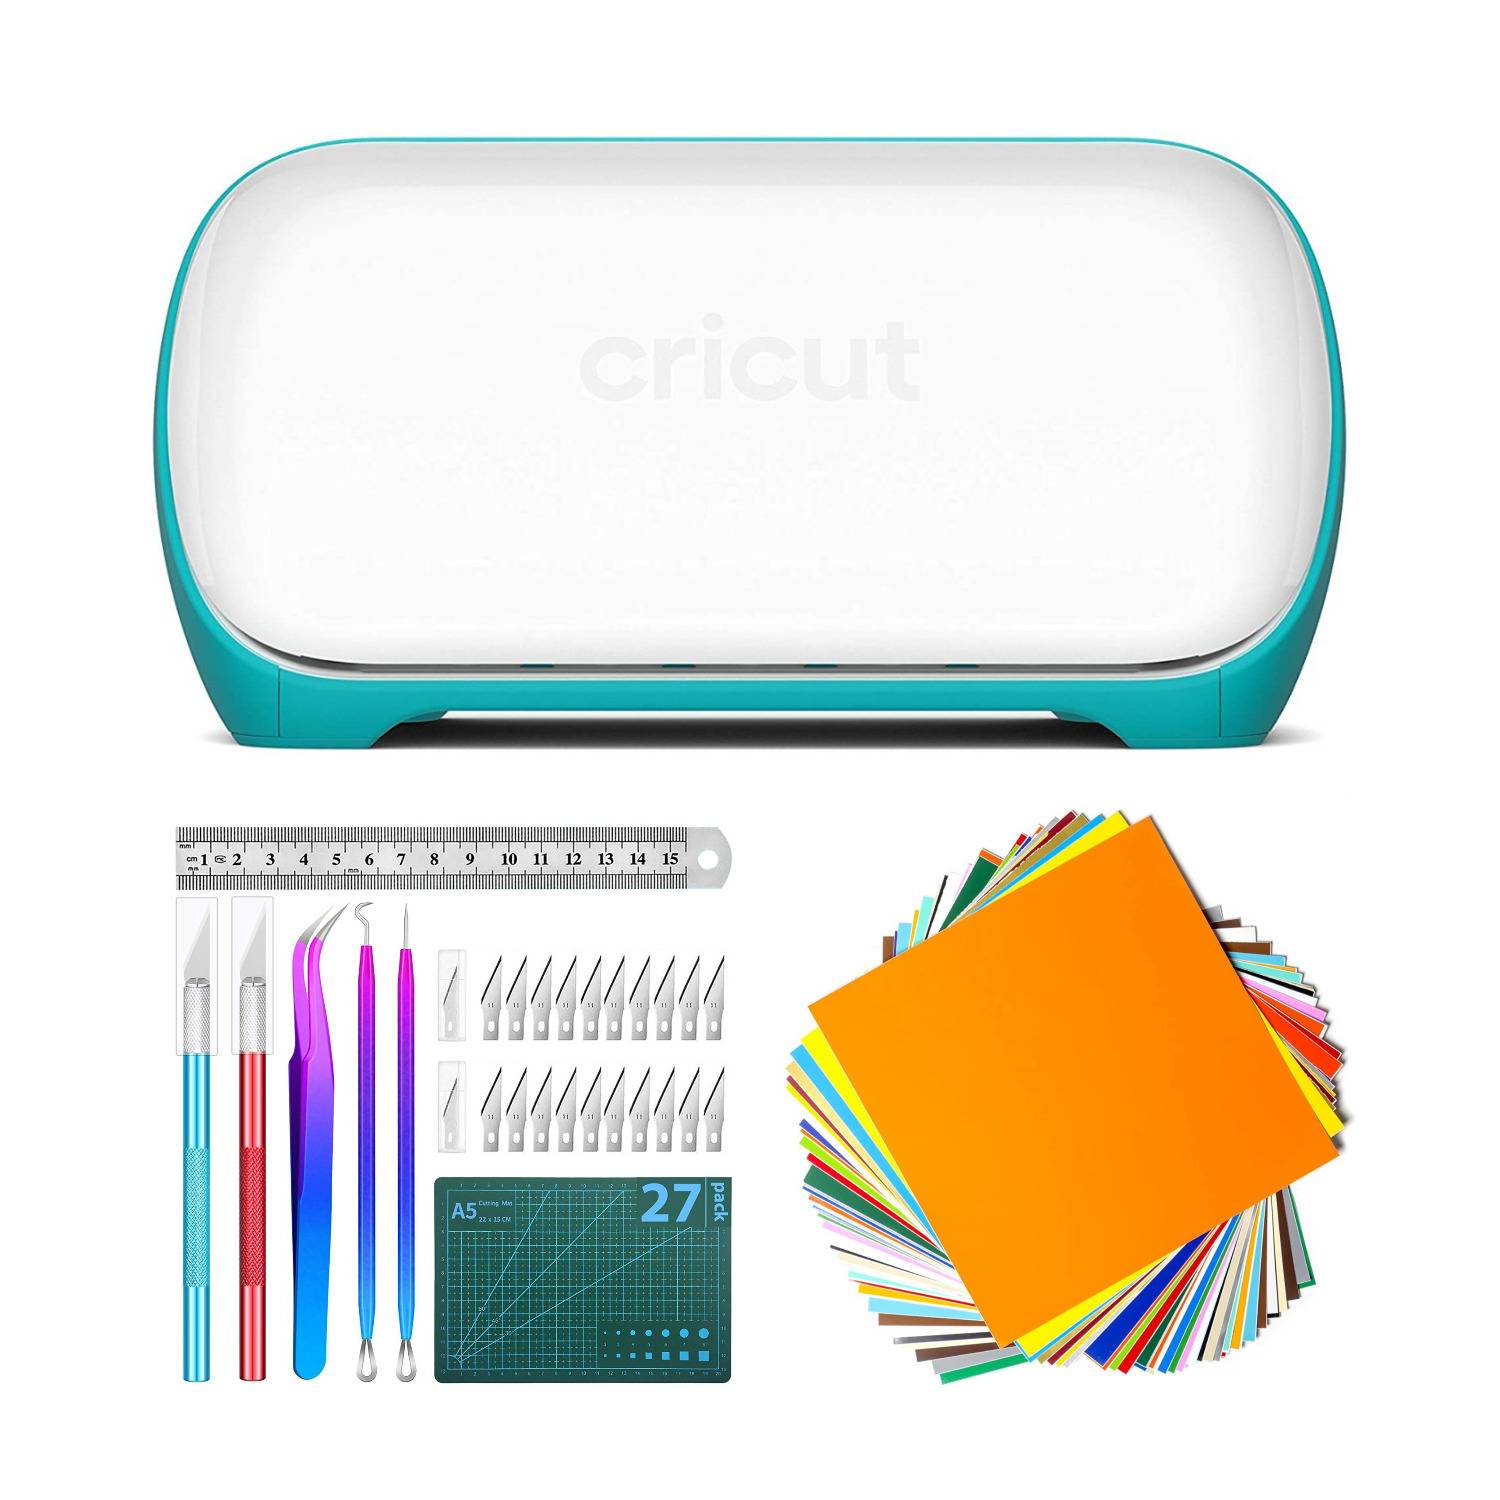 Cricut Joy Compact and Portable DIY Machine with Weeding Craft Tool Set and Adhesive Backed Vinyl Sheets